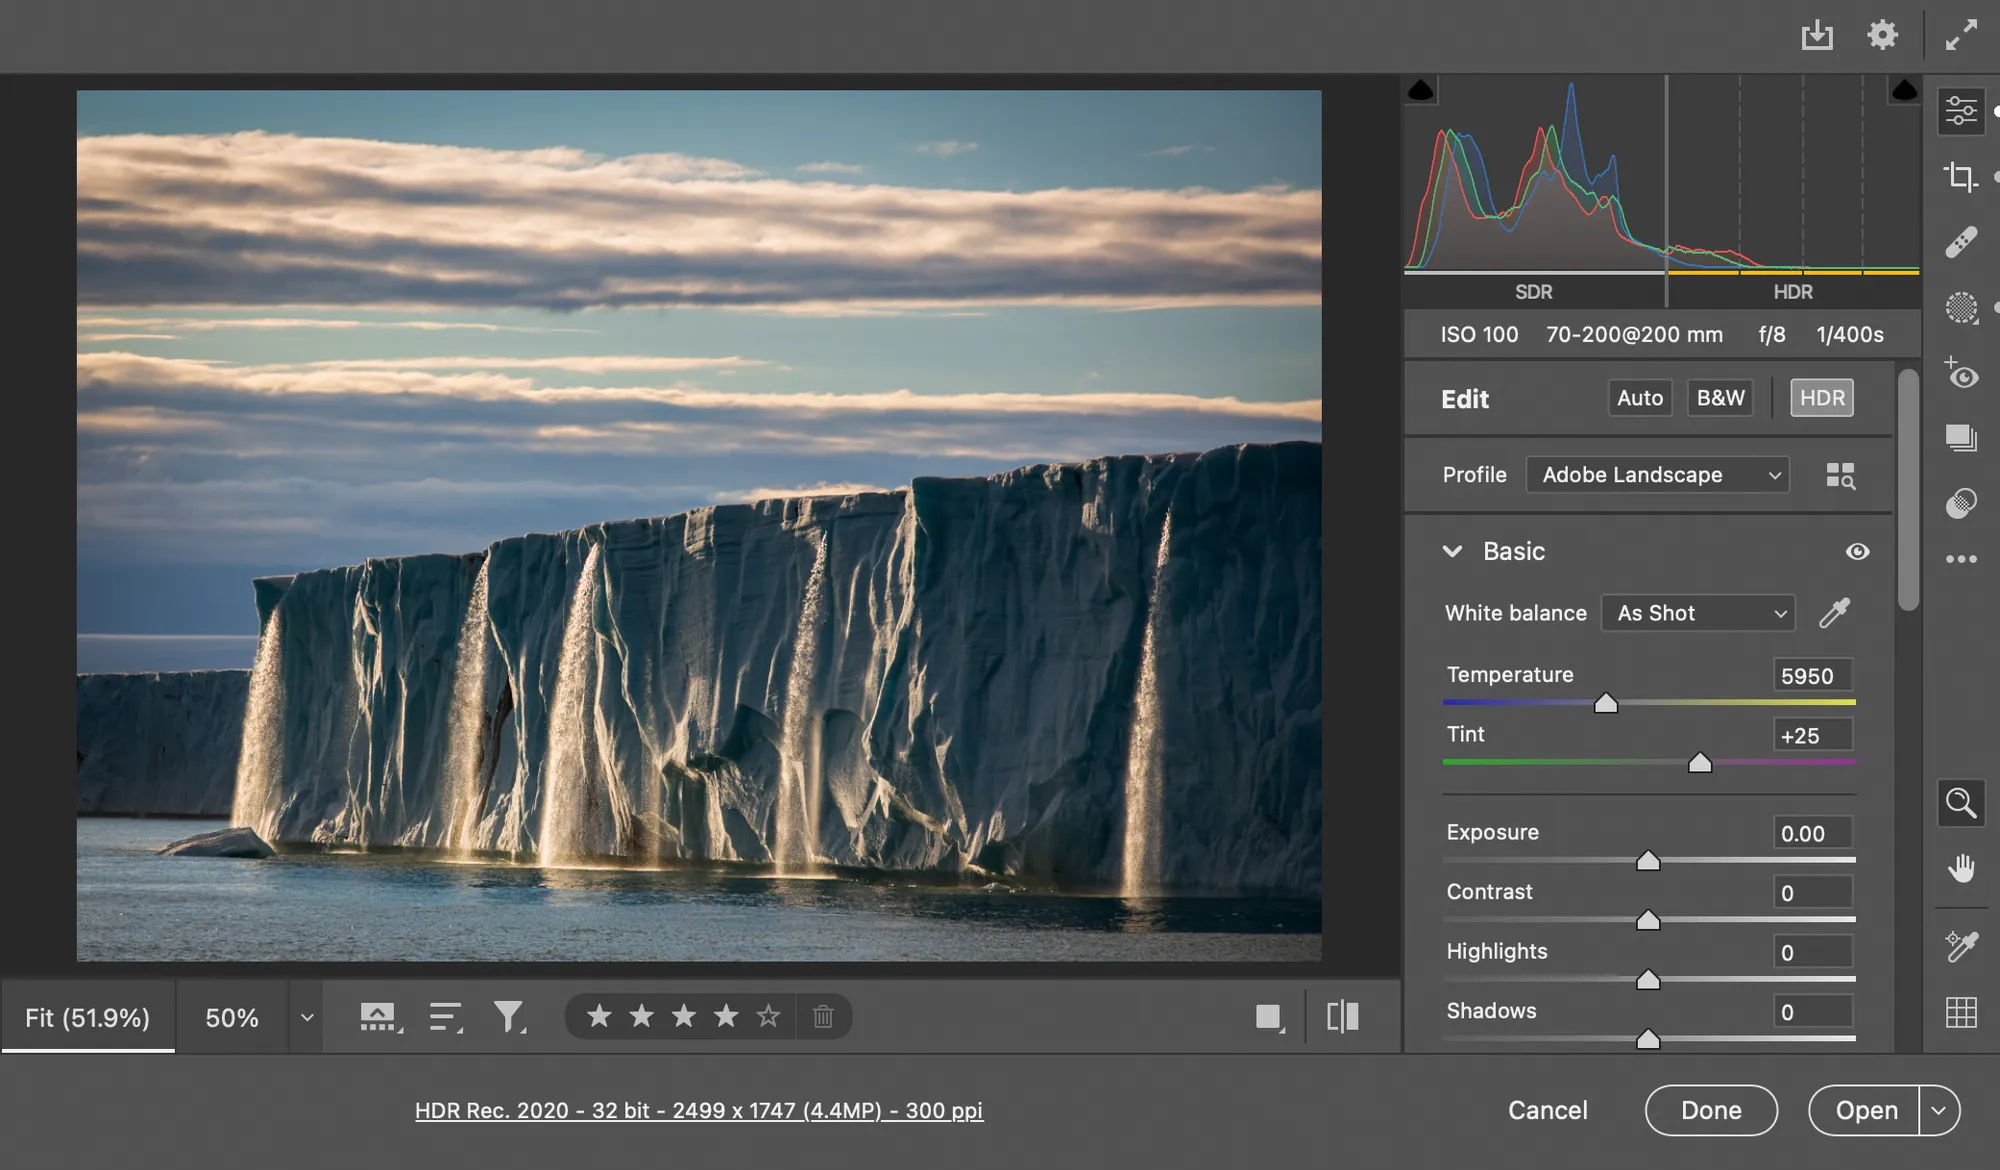 See the extended highlights in your histogram with HDR support in Camera Raw.